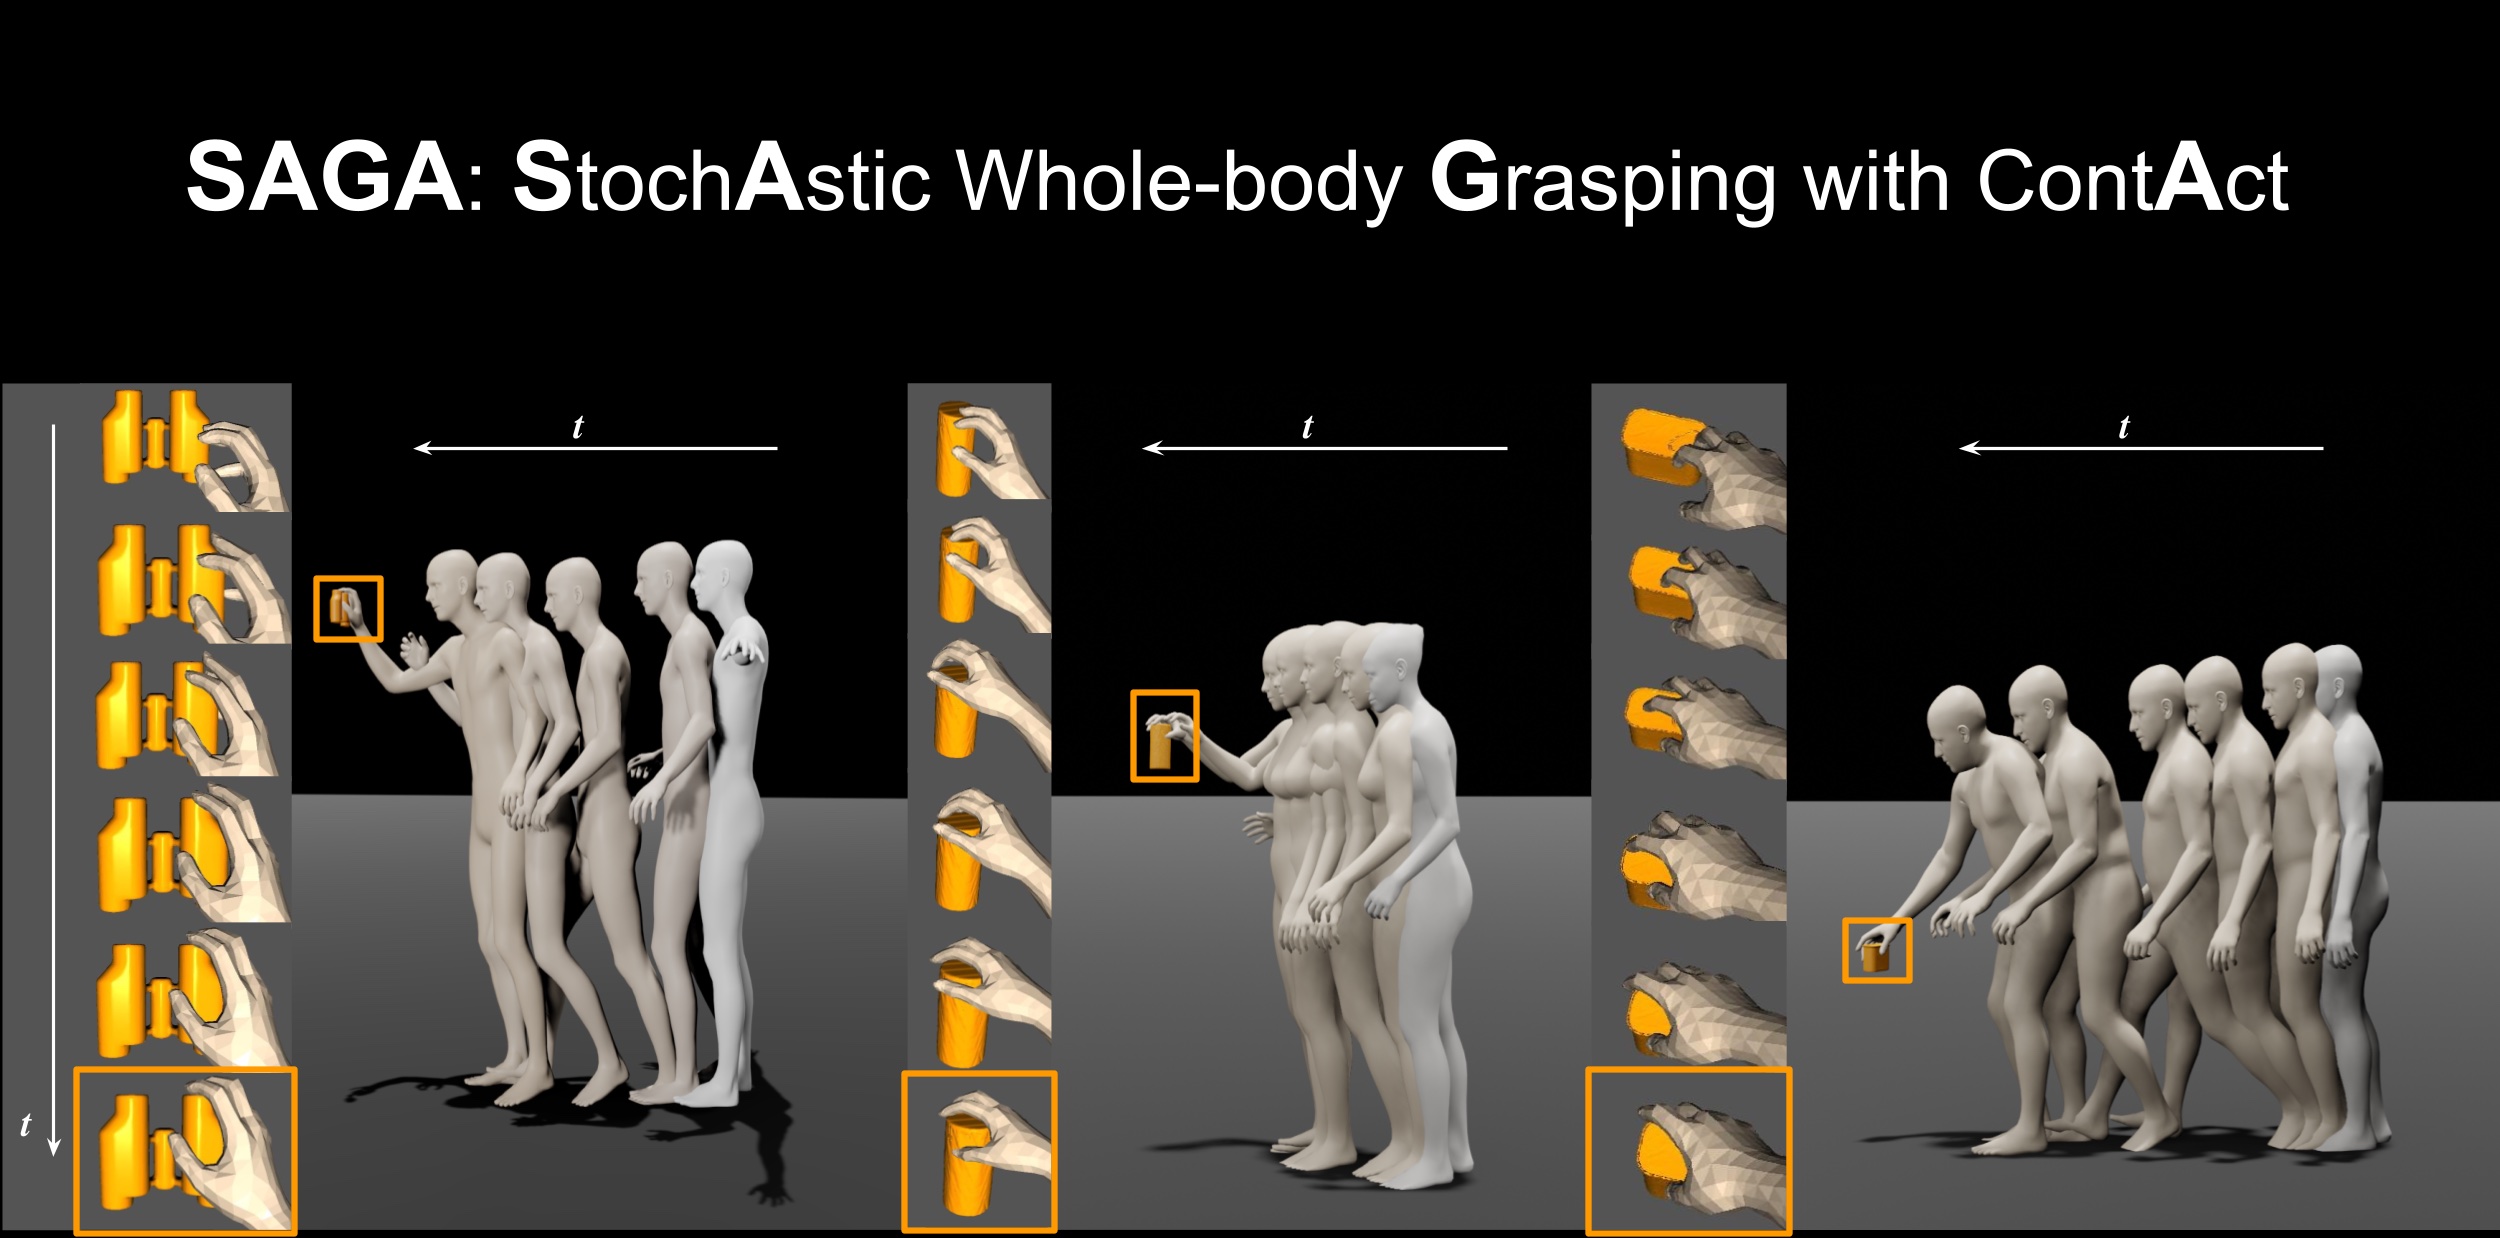 SAGA: Stochastic Whole-Body Grasping with Contact